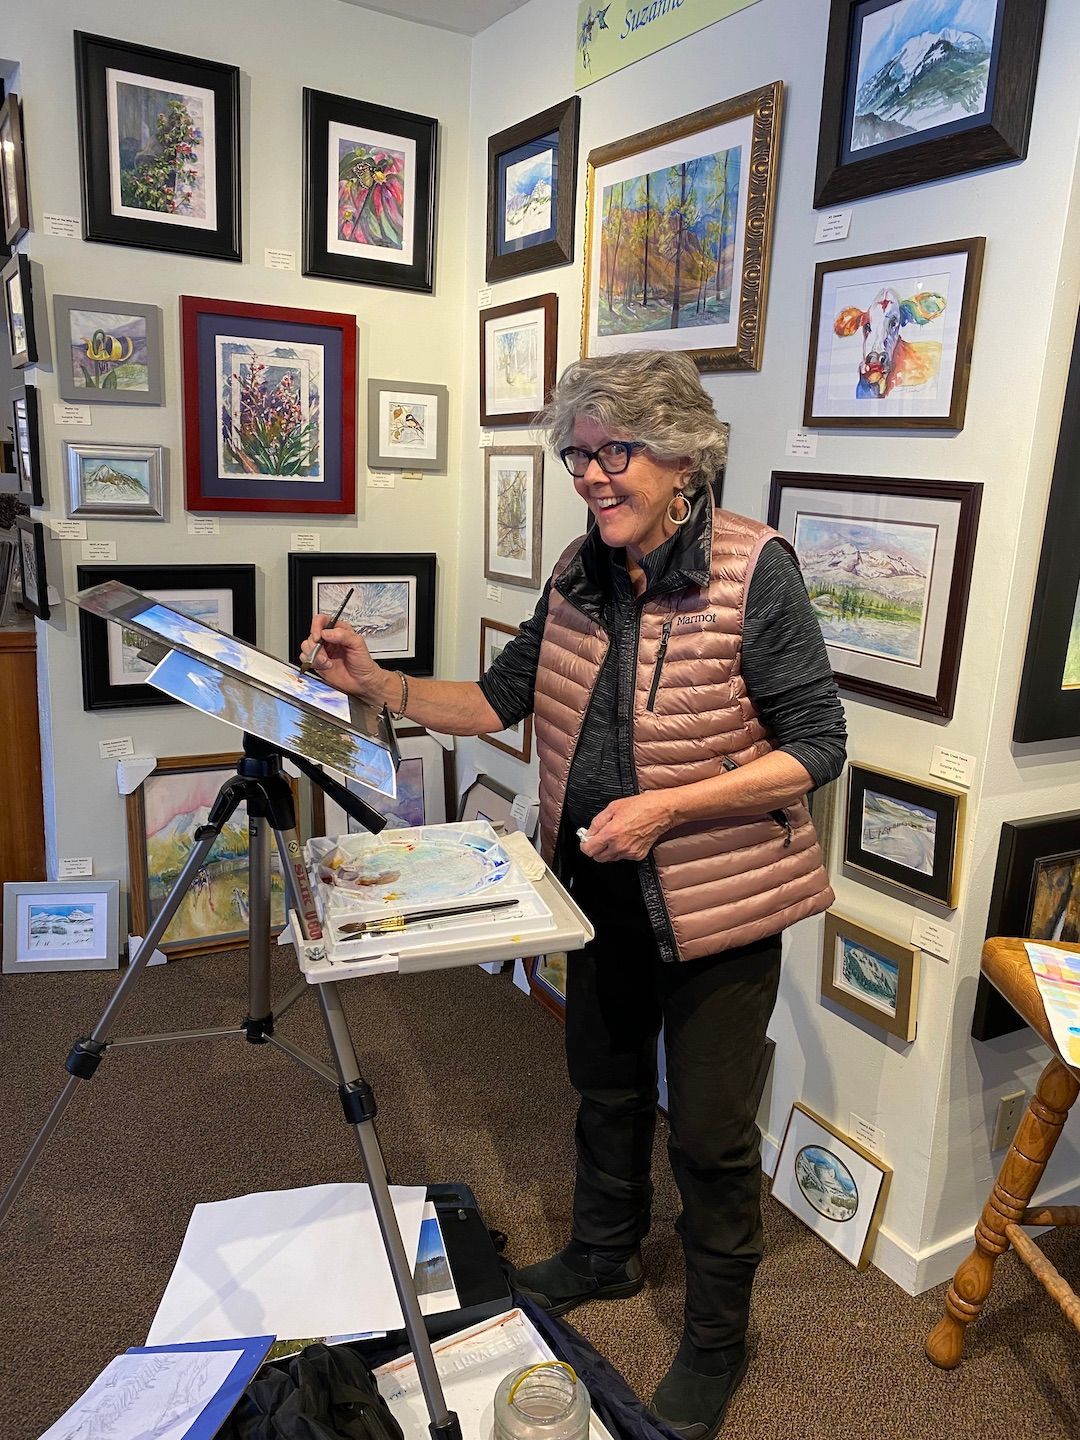 A woman is painting a picture on an easel in a room.